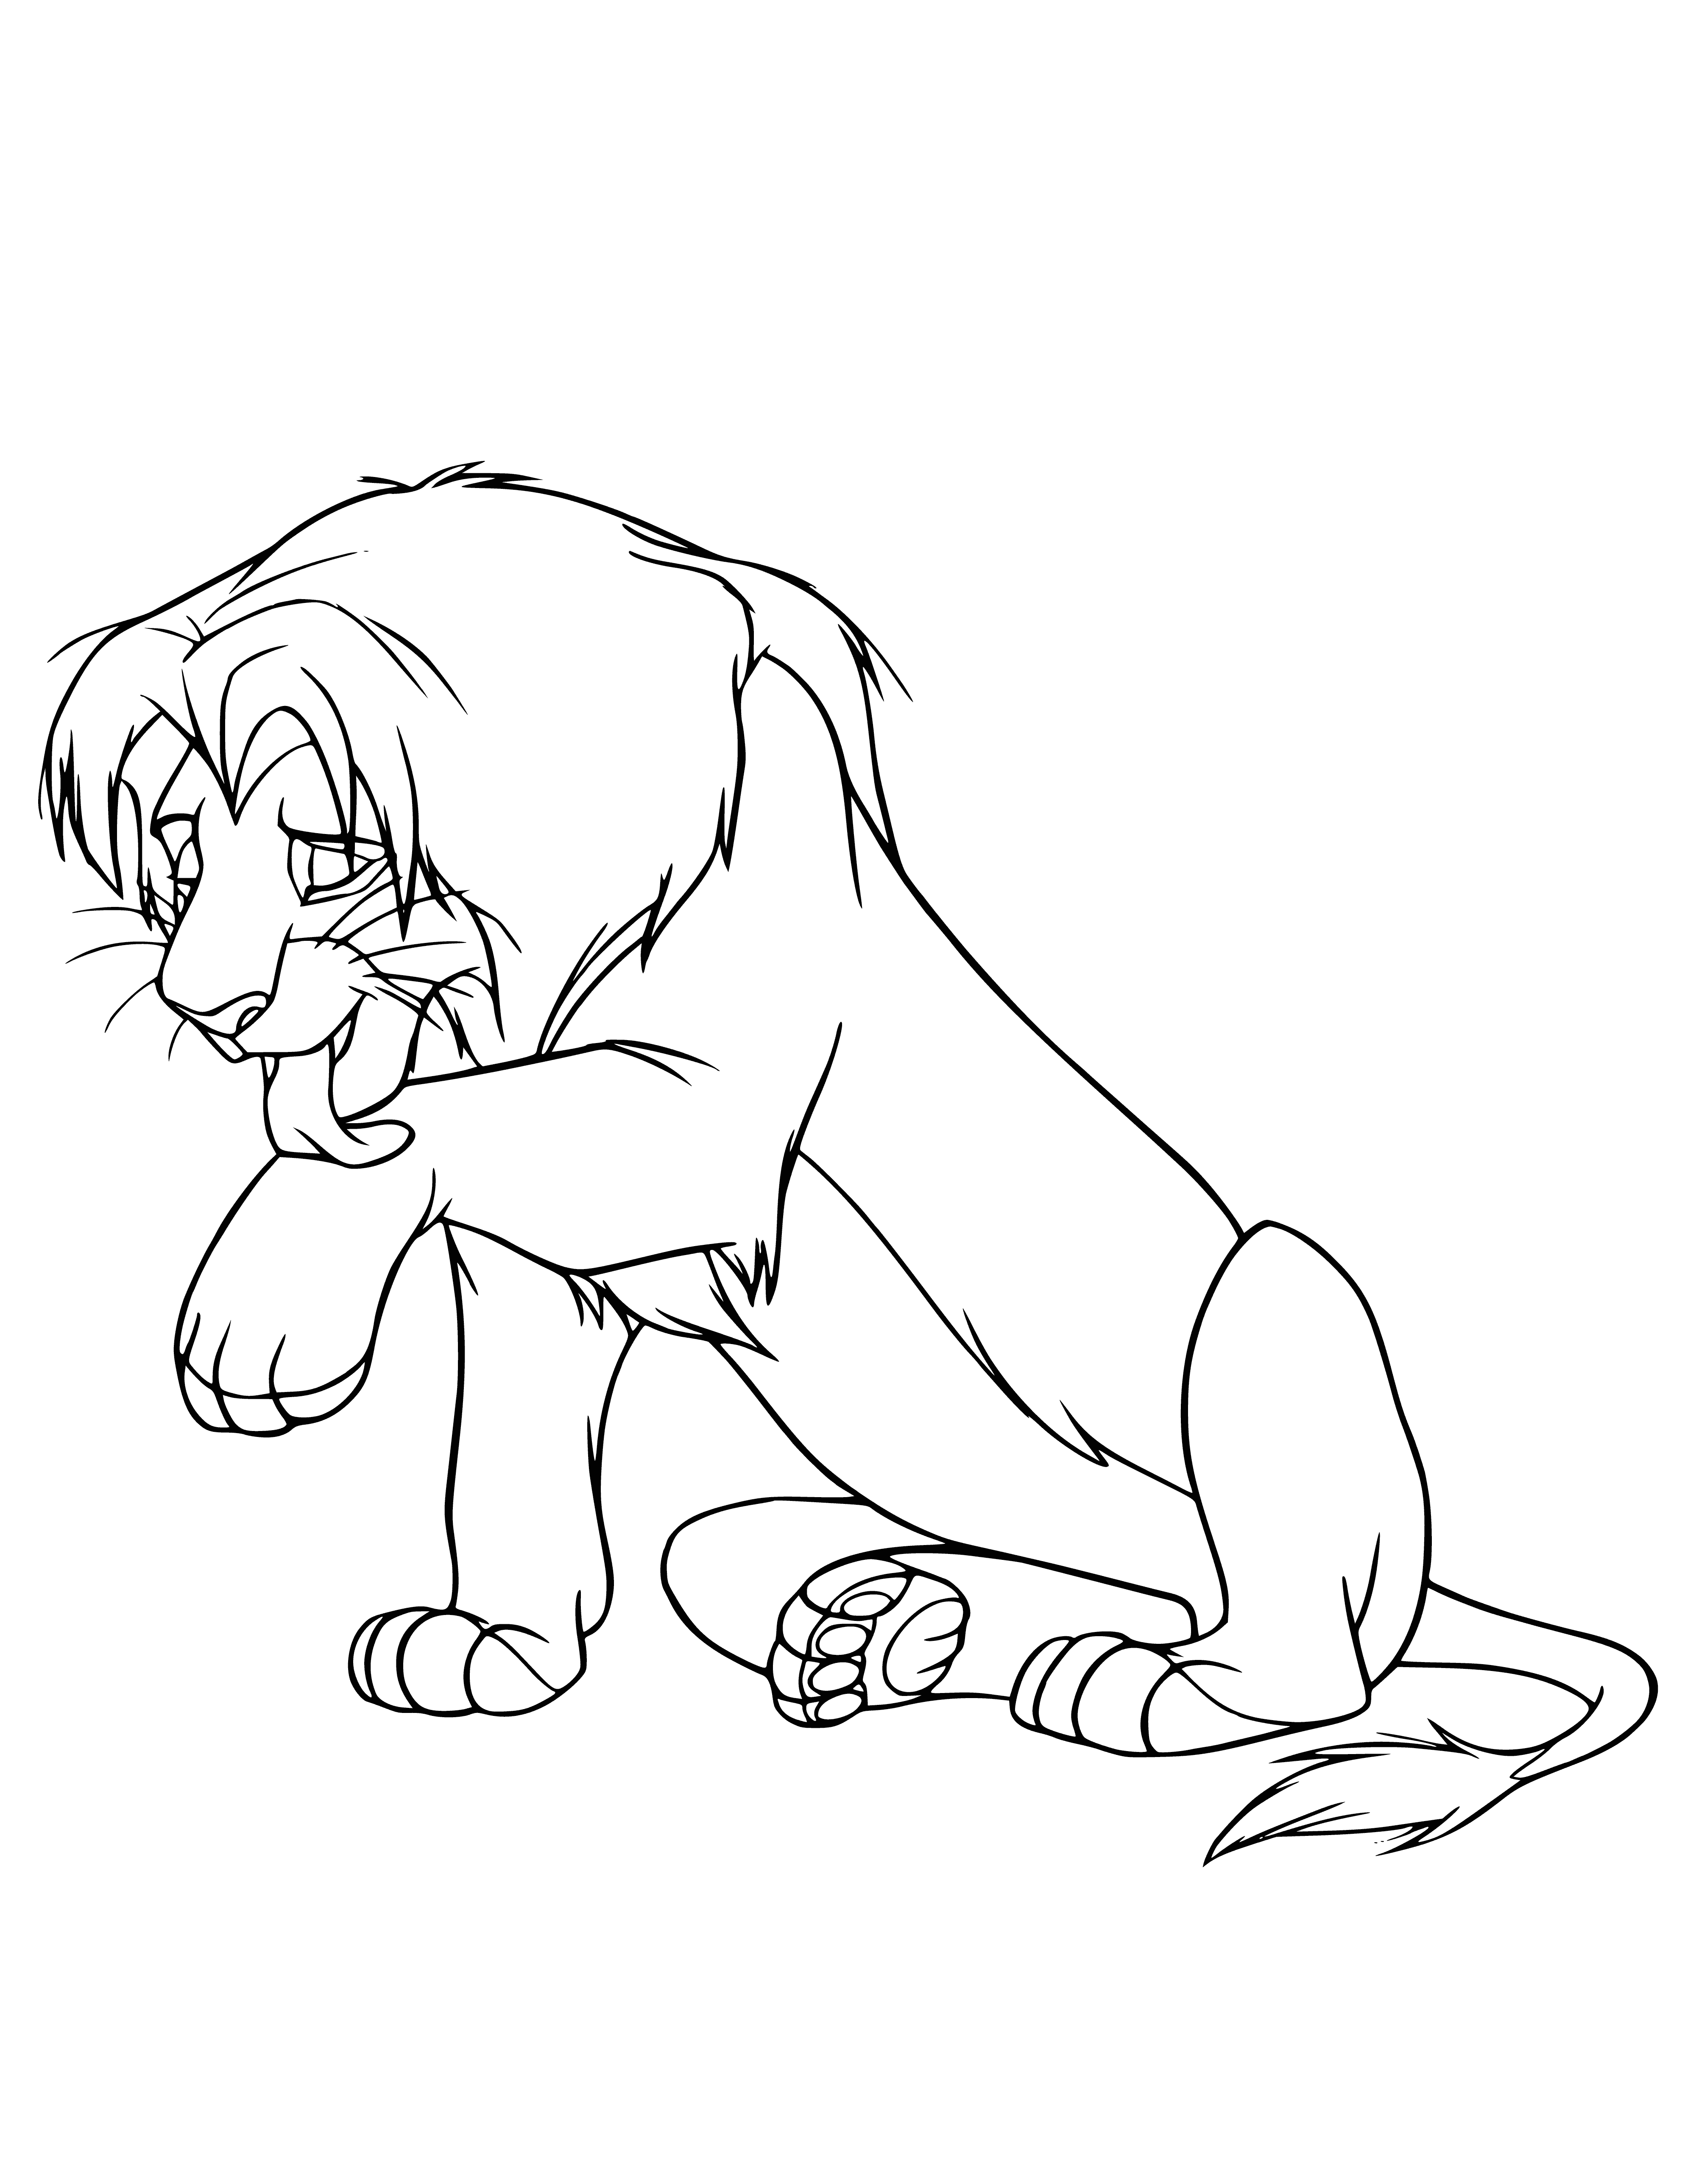 Lion licking paw coloring page